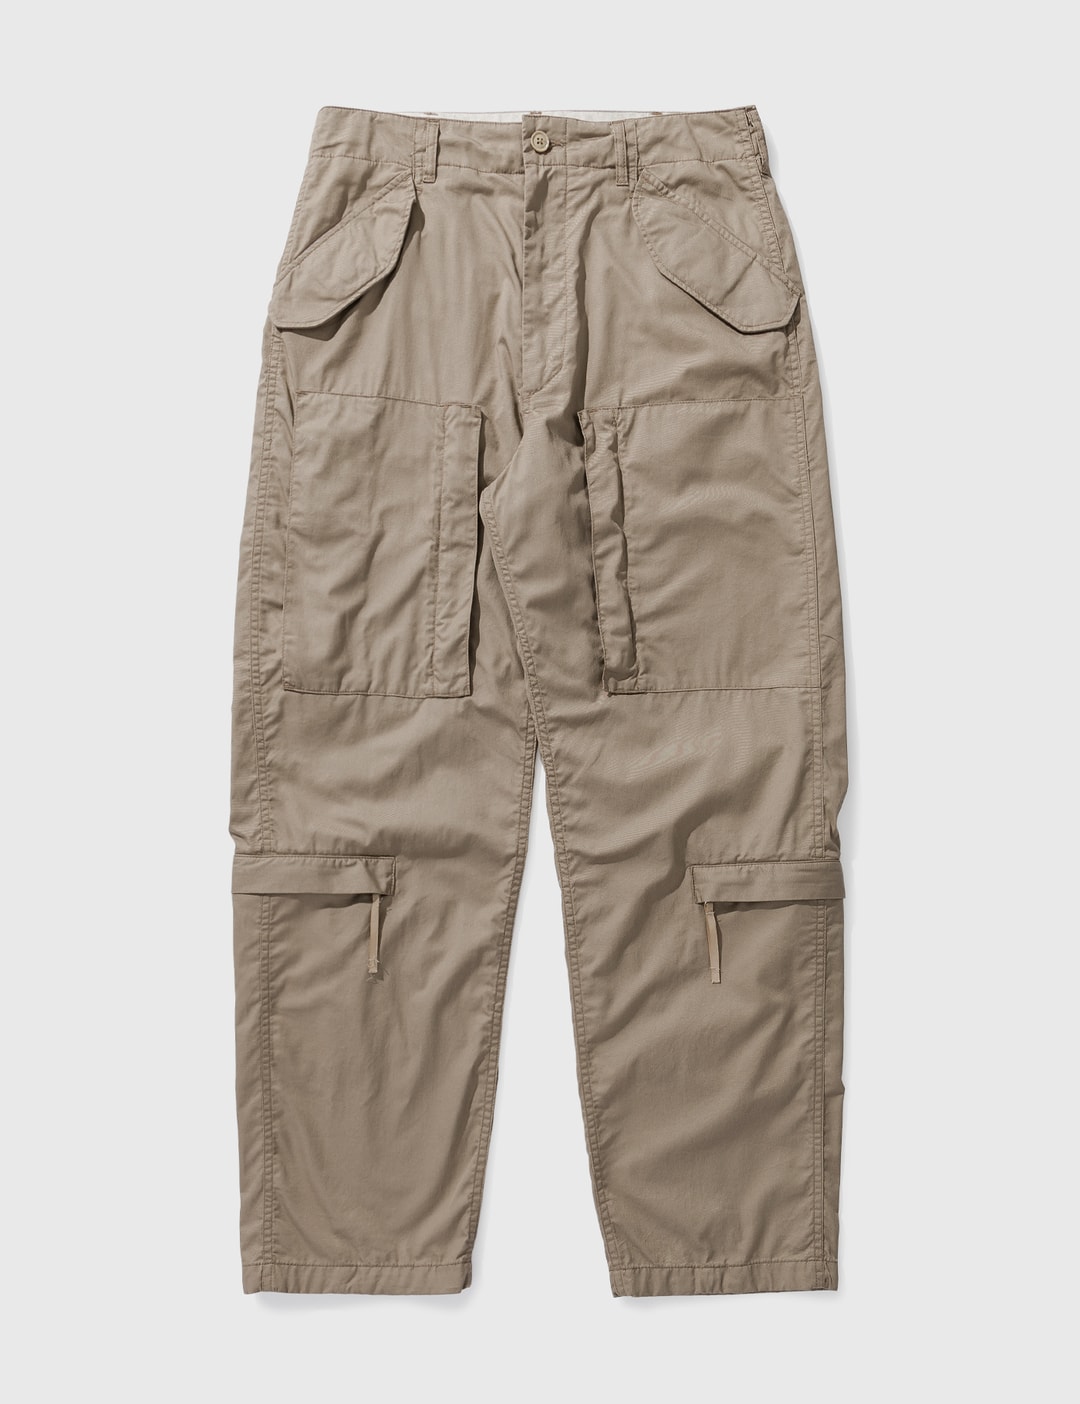 Engineered Garments - Aircrew Pants | HBX - Globally Curated Fashion ...